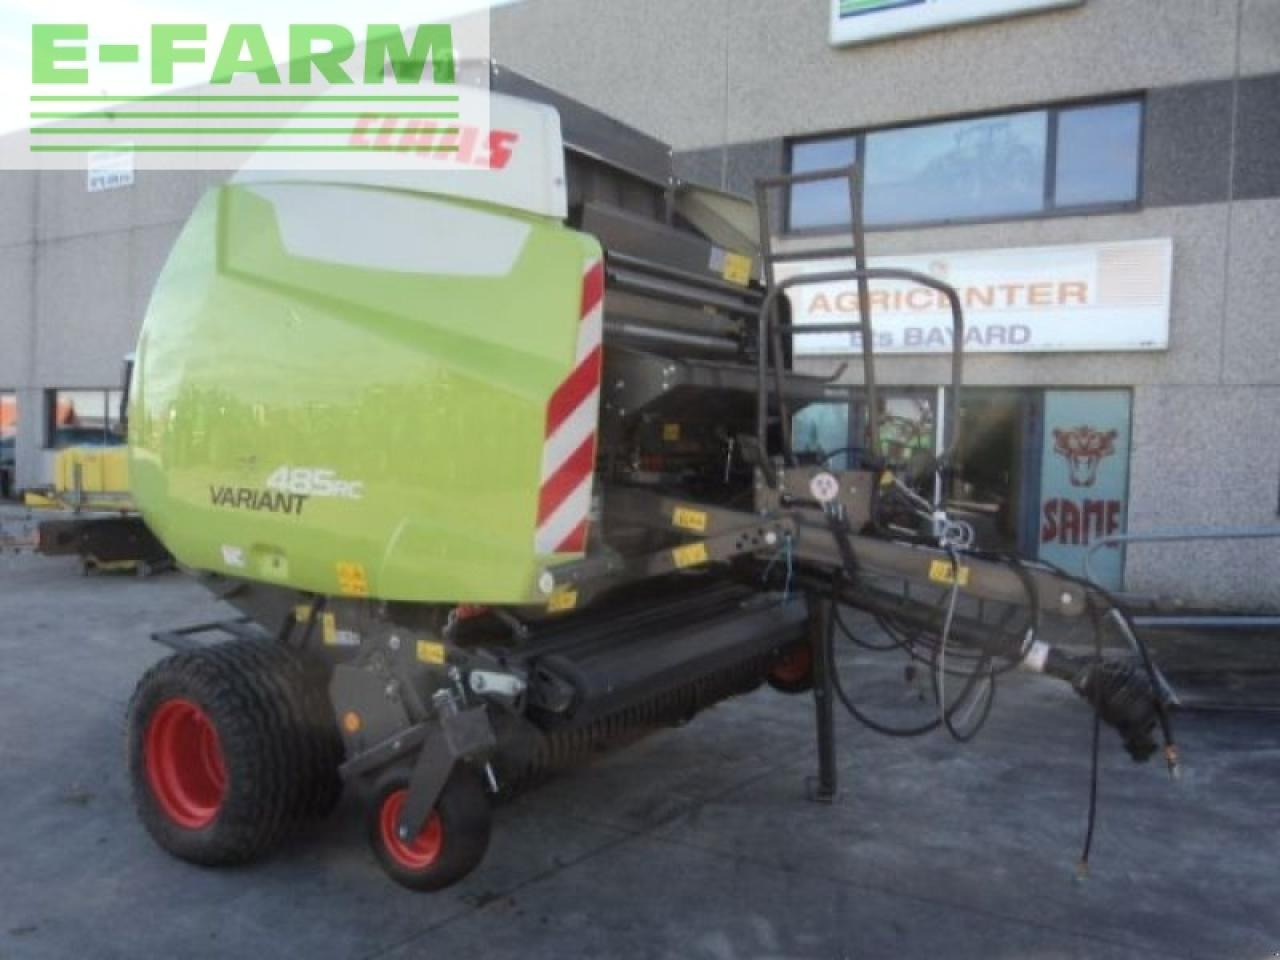 Tracteur agricole CLAAS variant 485 rc